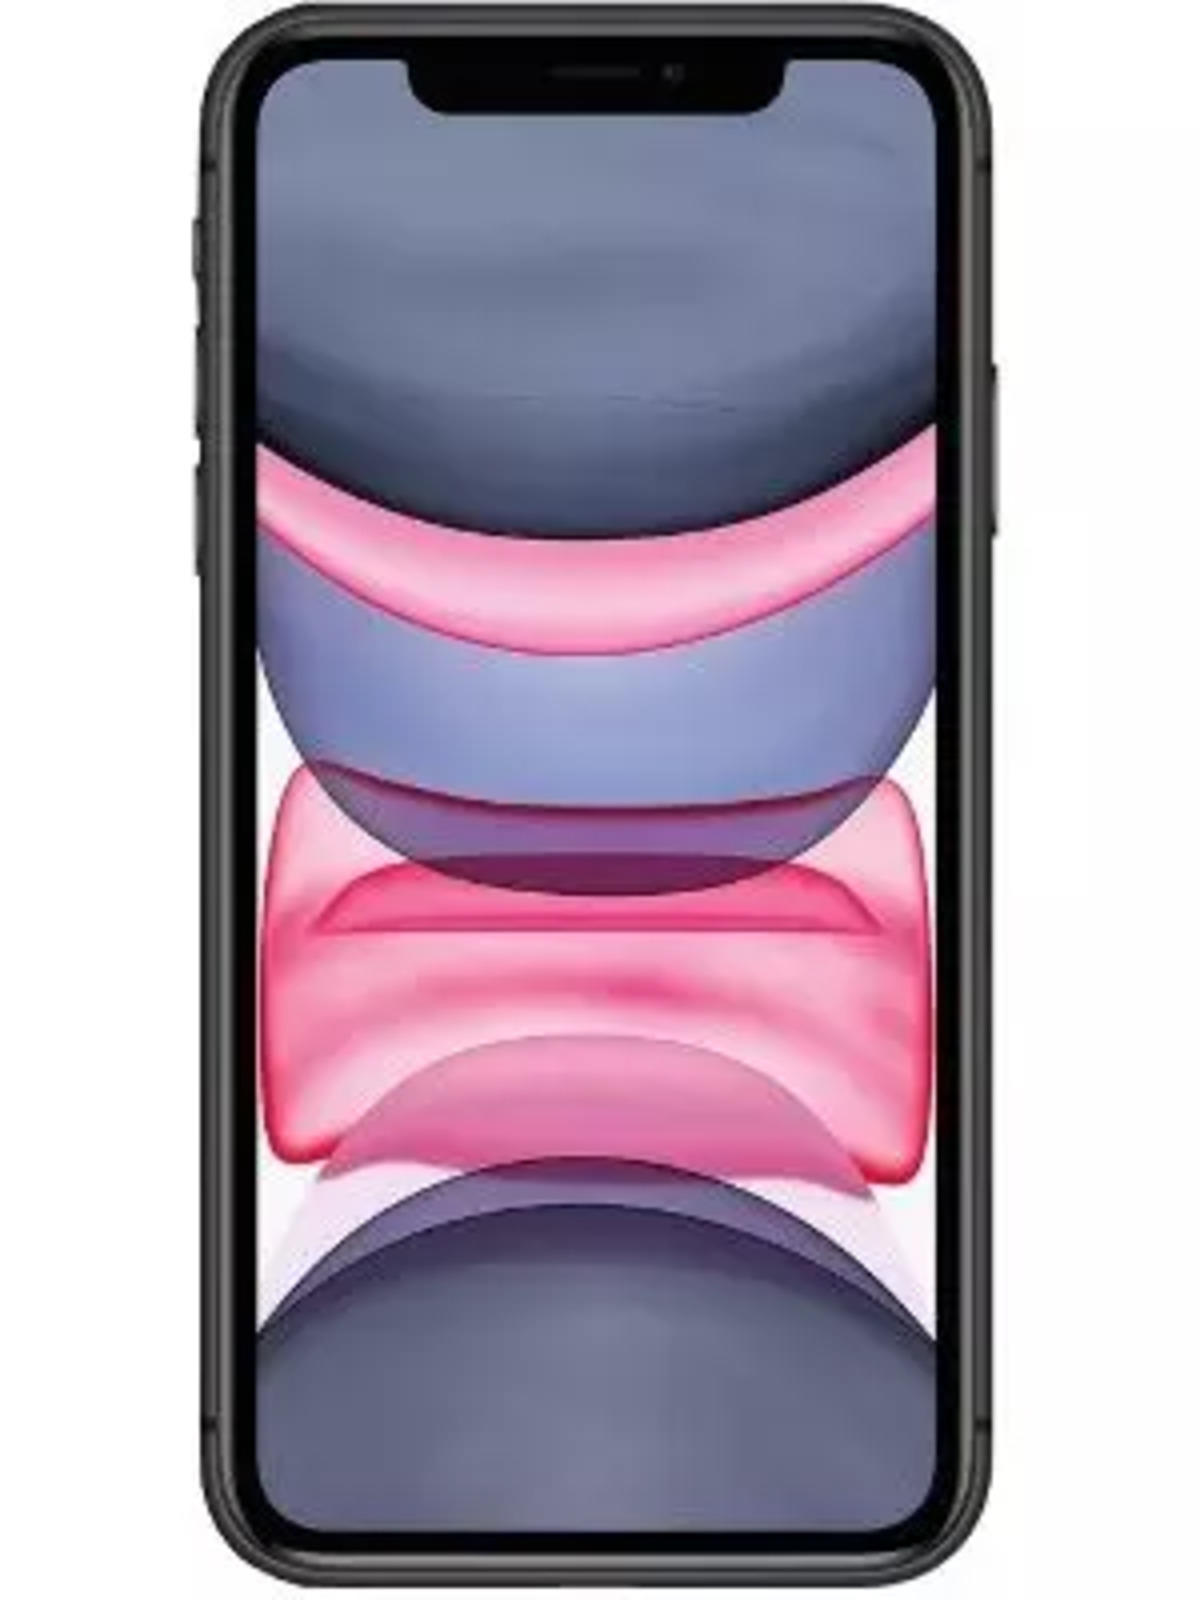 Apple Iphone 11 Price In India Full Specifications 29th Nov 22 At Gadgets Now